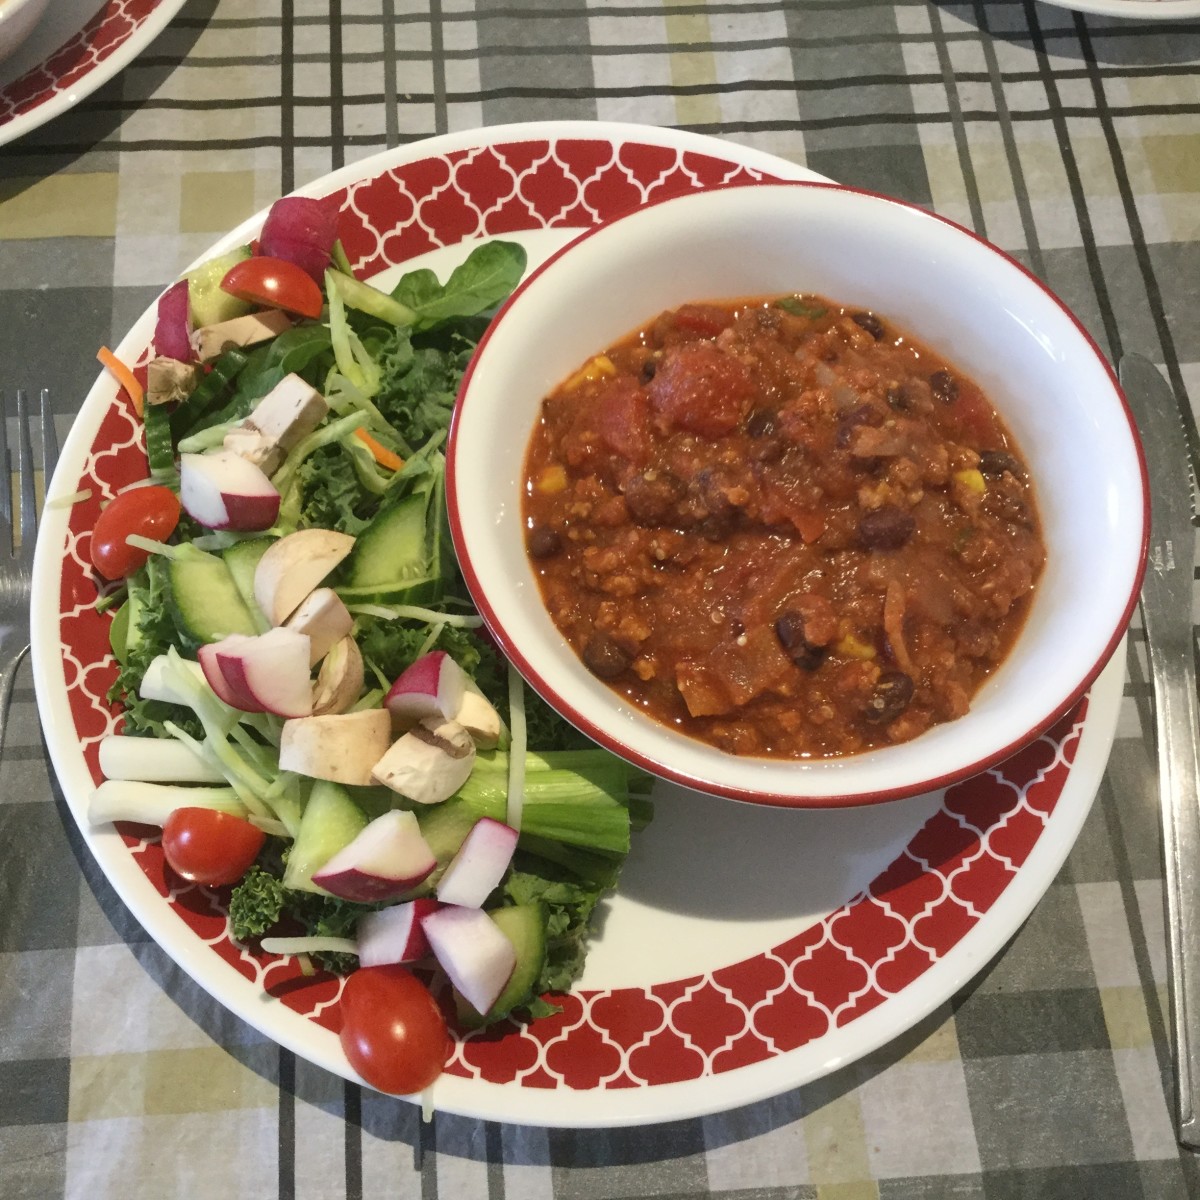 Vegan chili served with a green salad.